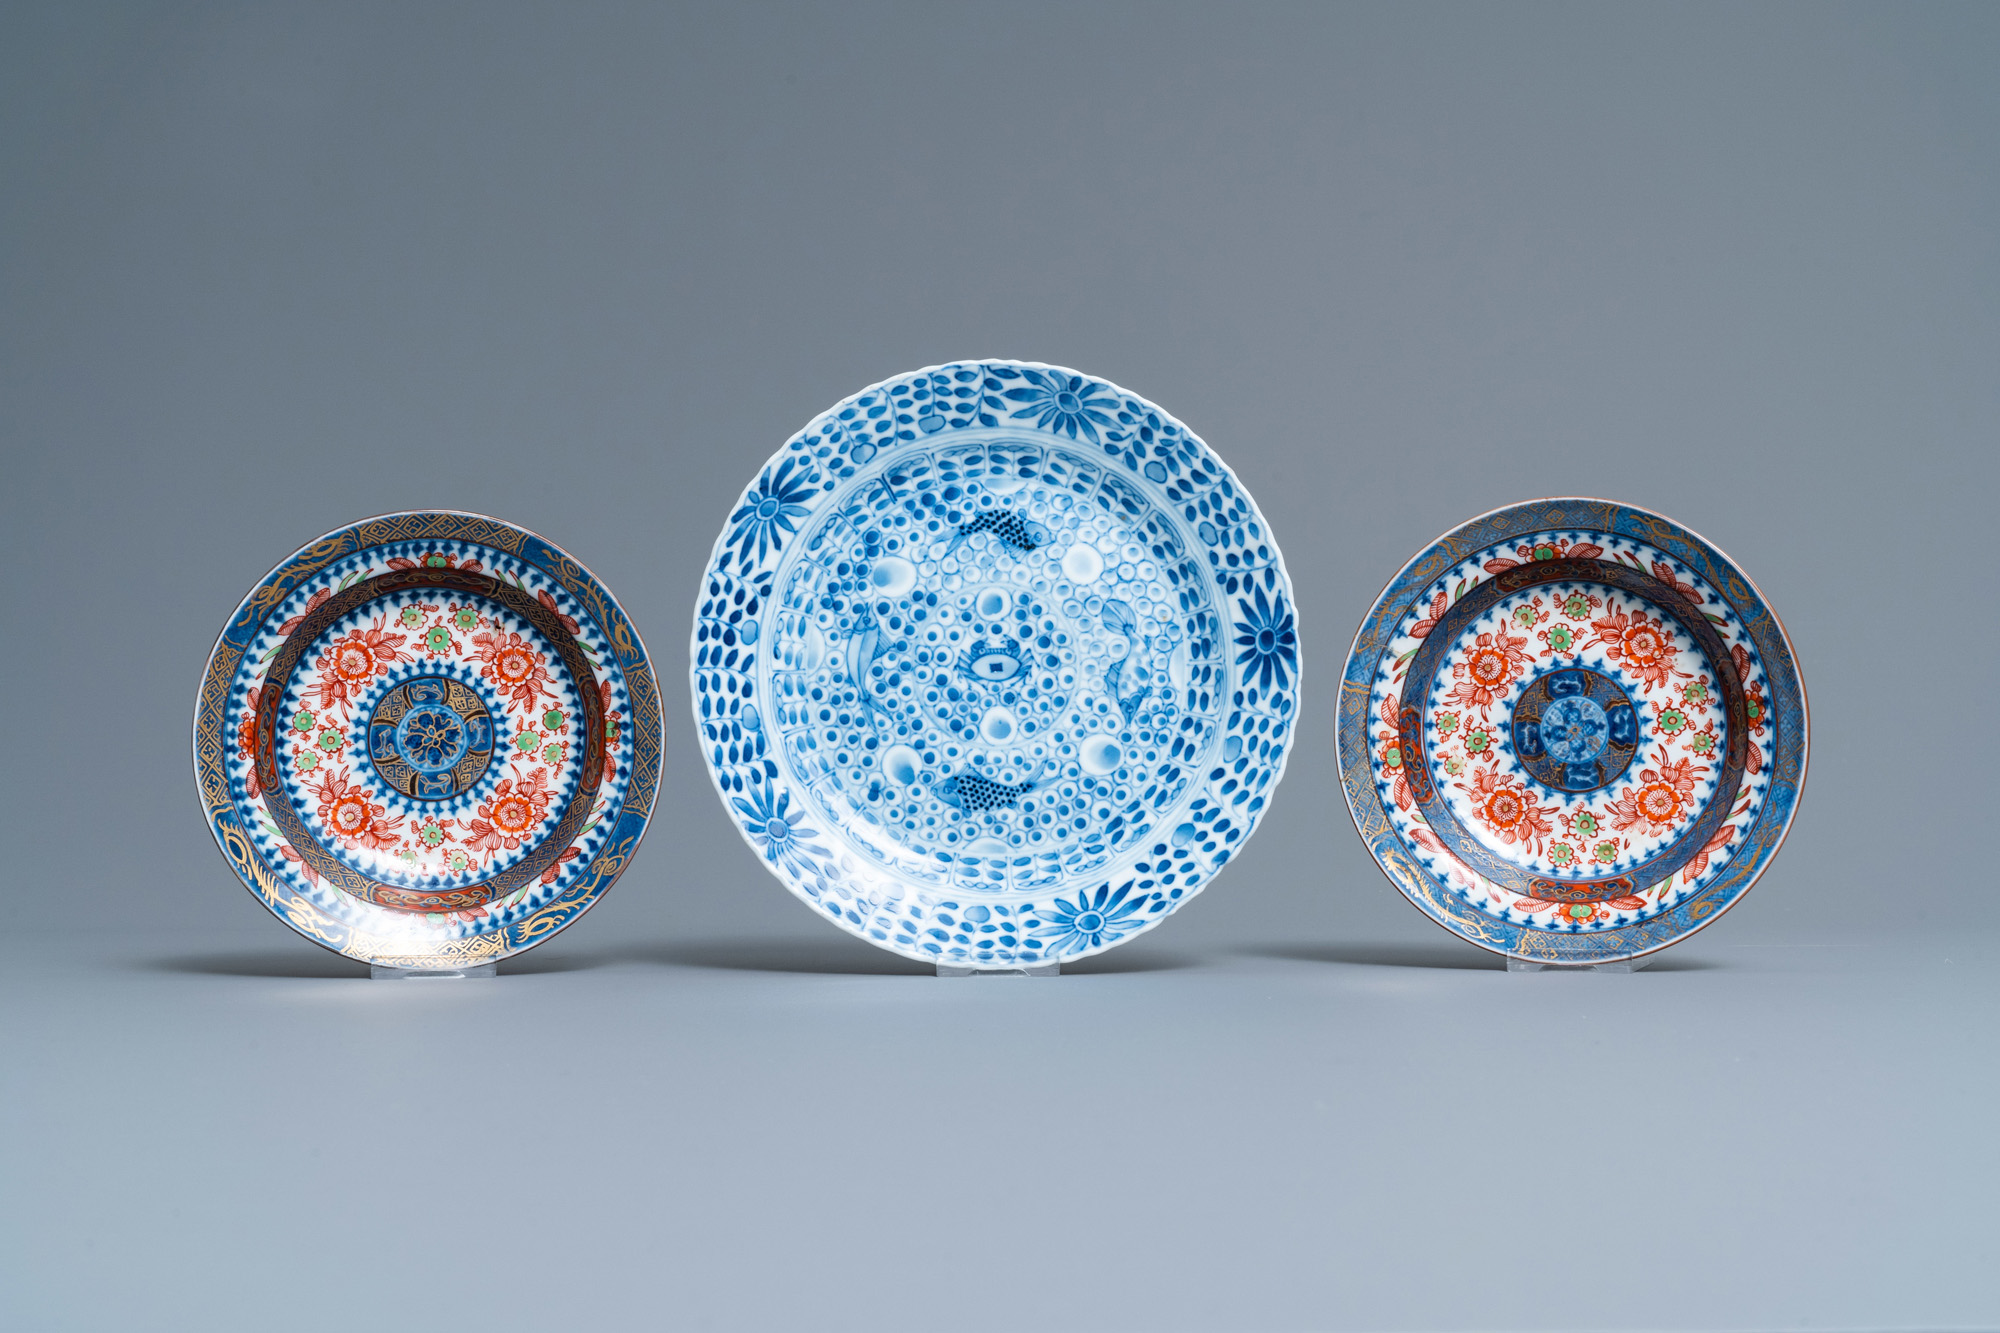 A varied collection of Chinese porcelain, 19th C. - Image 6 of 19